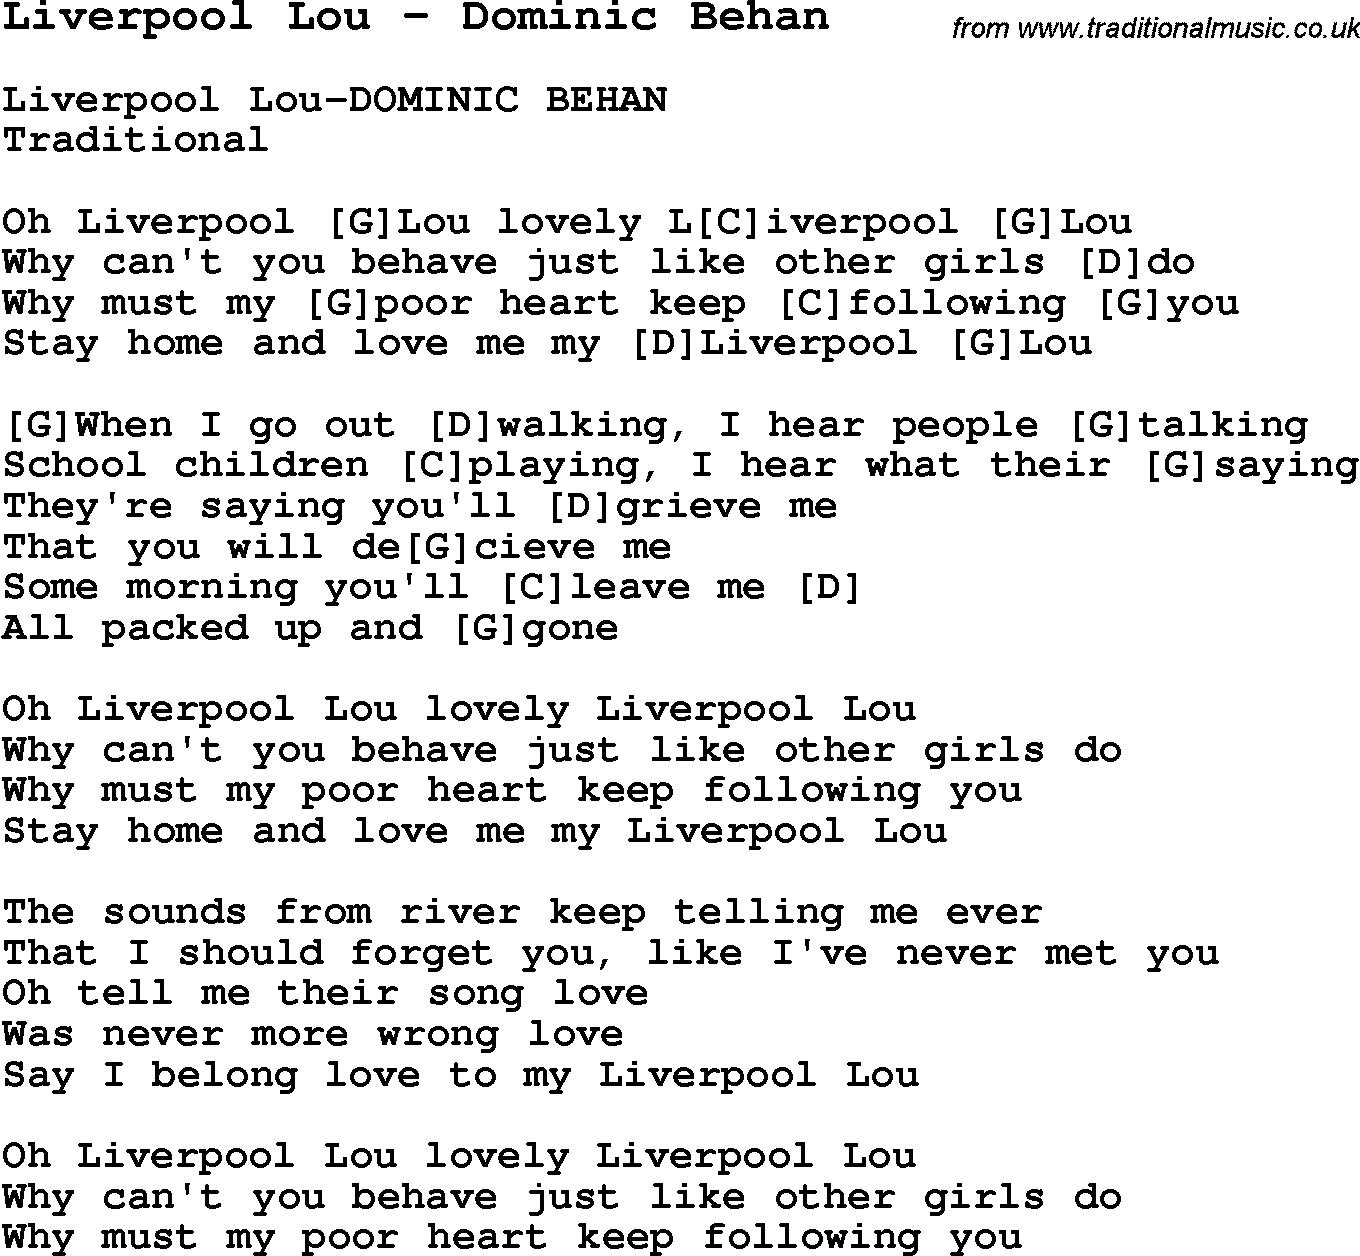 Traditional Song Liverpool Lou - Dominic Behan with Chords, Tabs and Lyrics